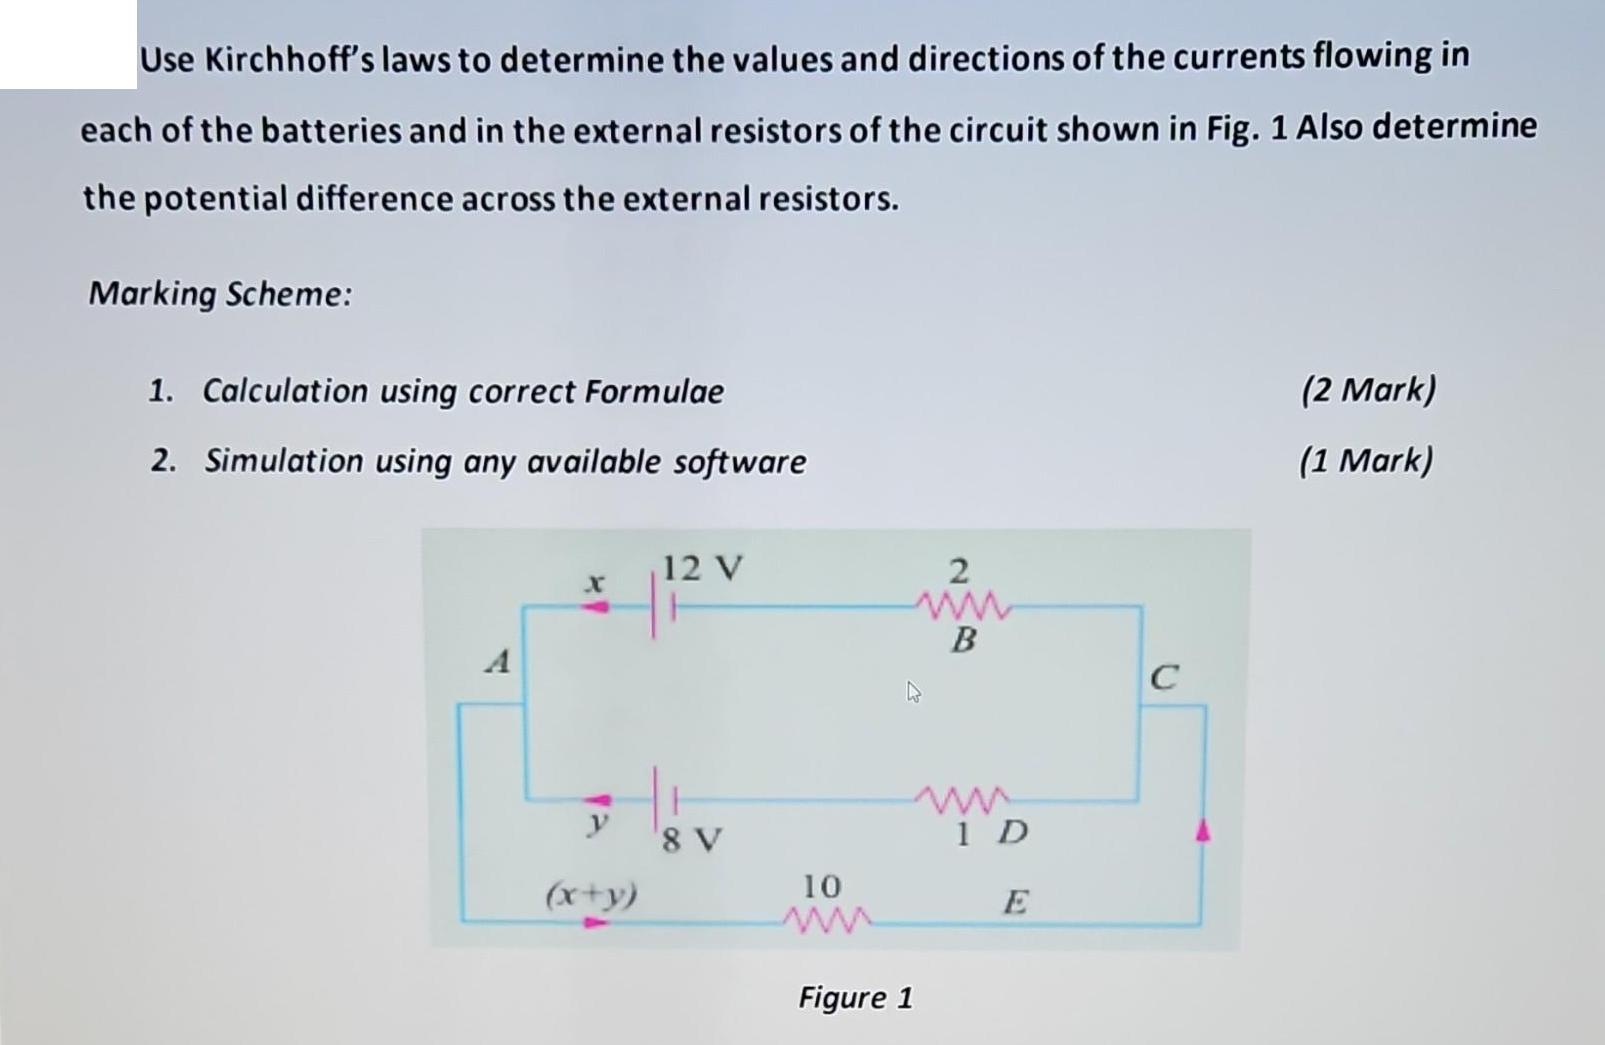 Use Kirchhoff's laws to determine the values and directions of the currents flowing in each of the batteries